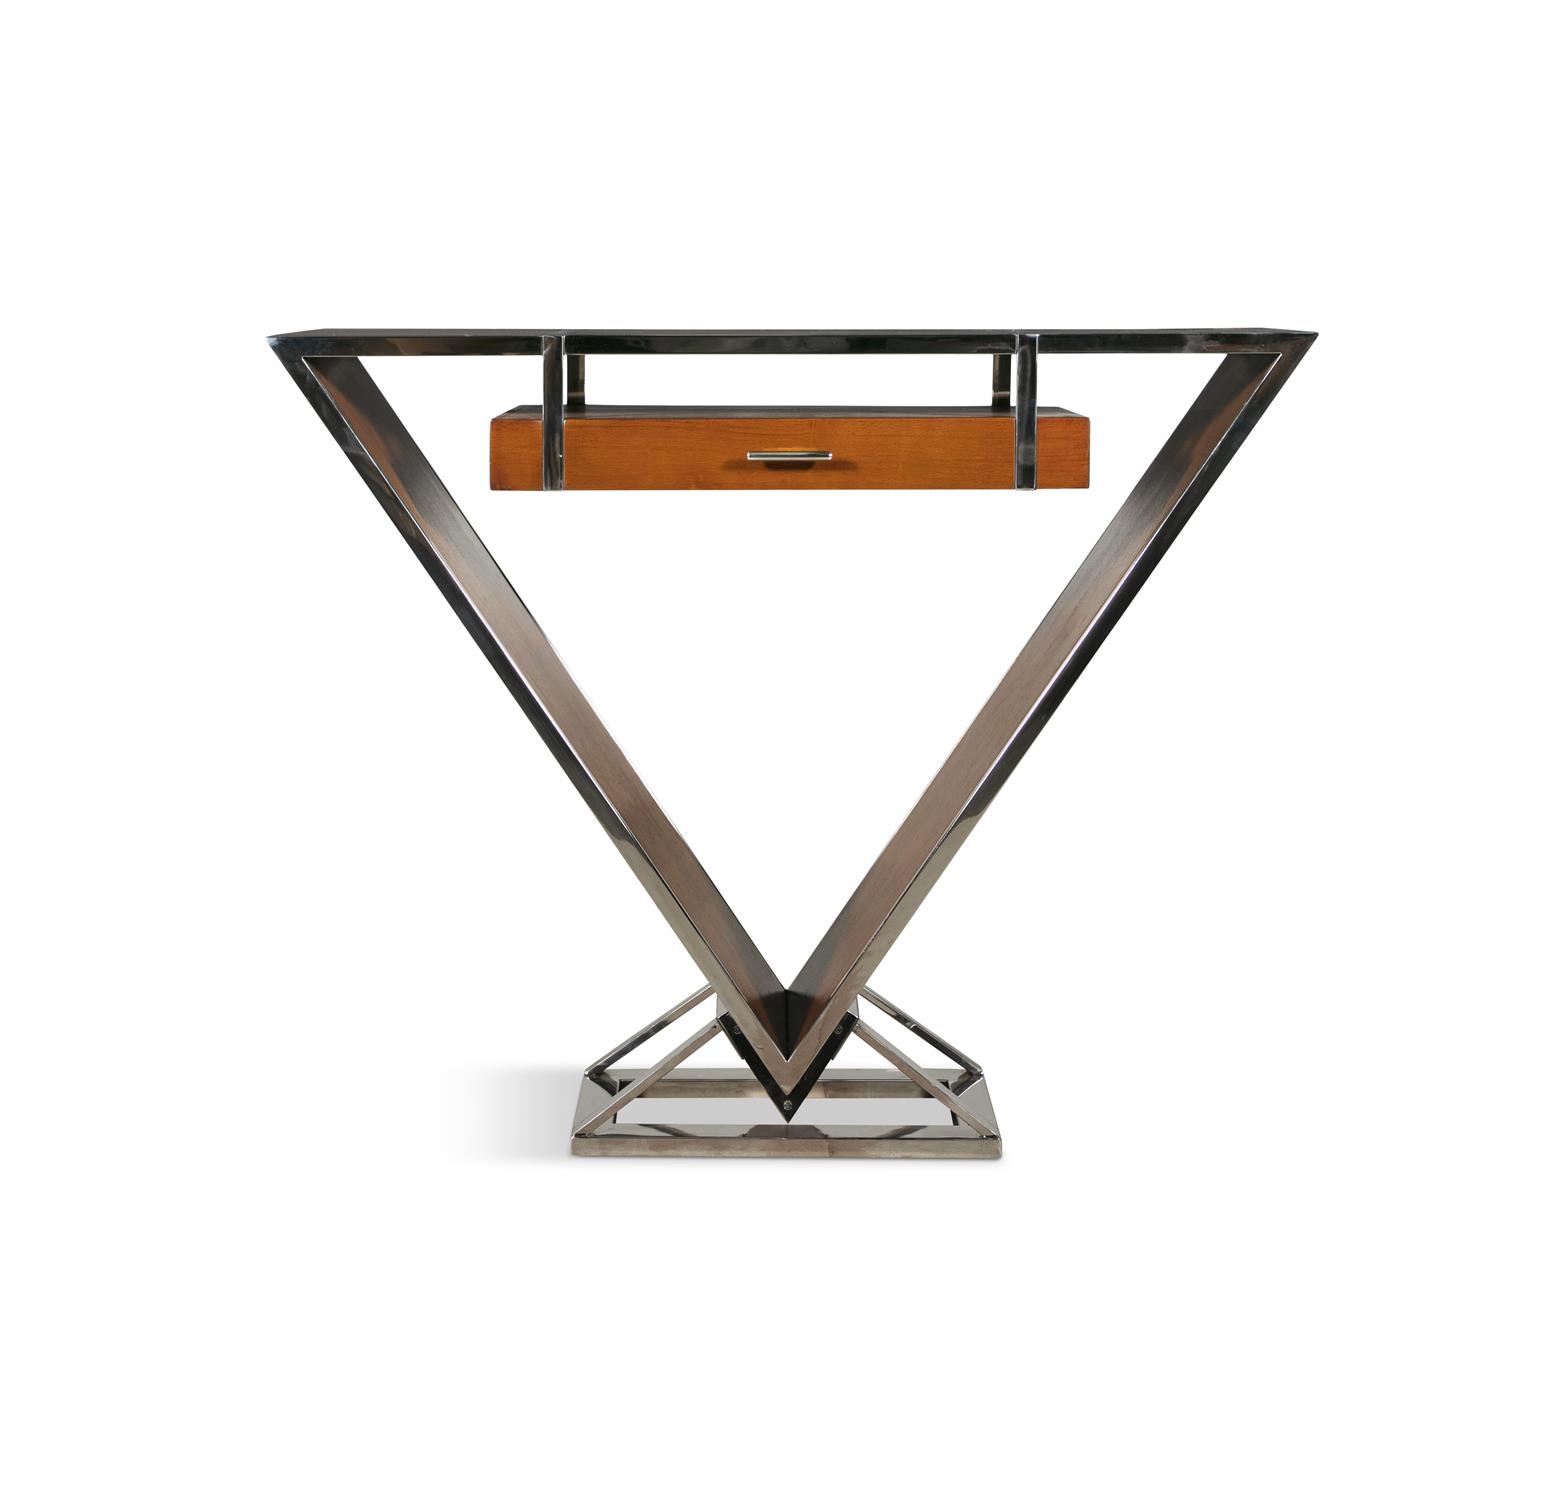 CONSOLE A triangular shaped console with a single drawer. Chrome and teak. France.